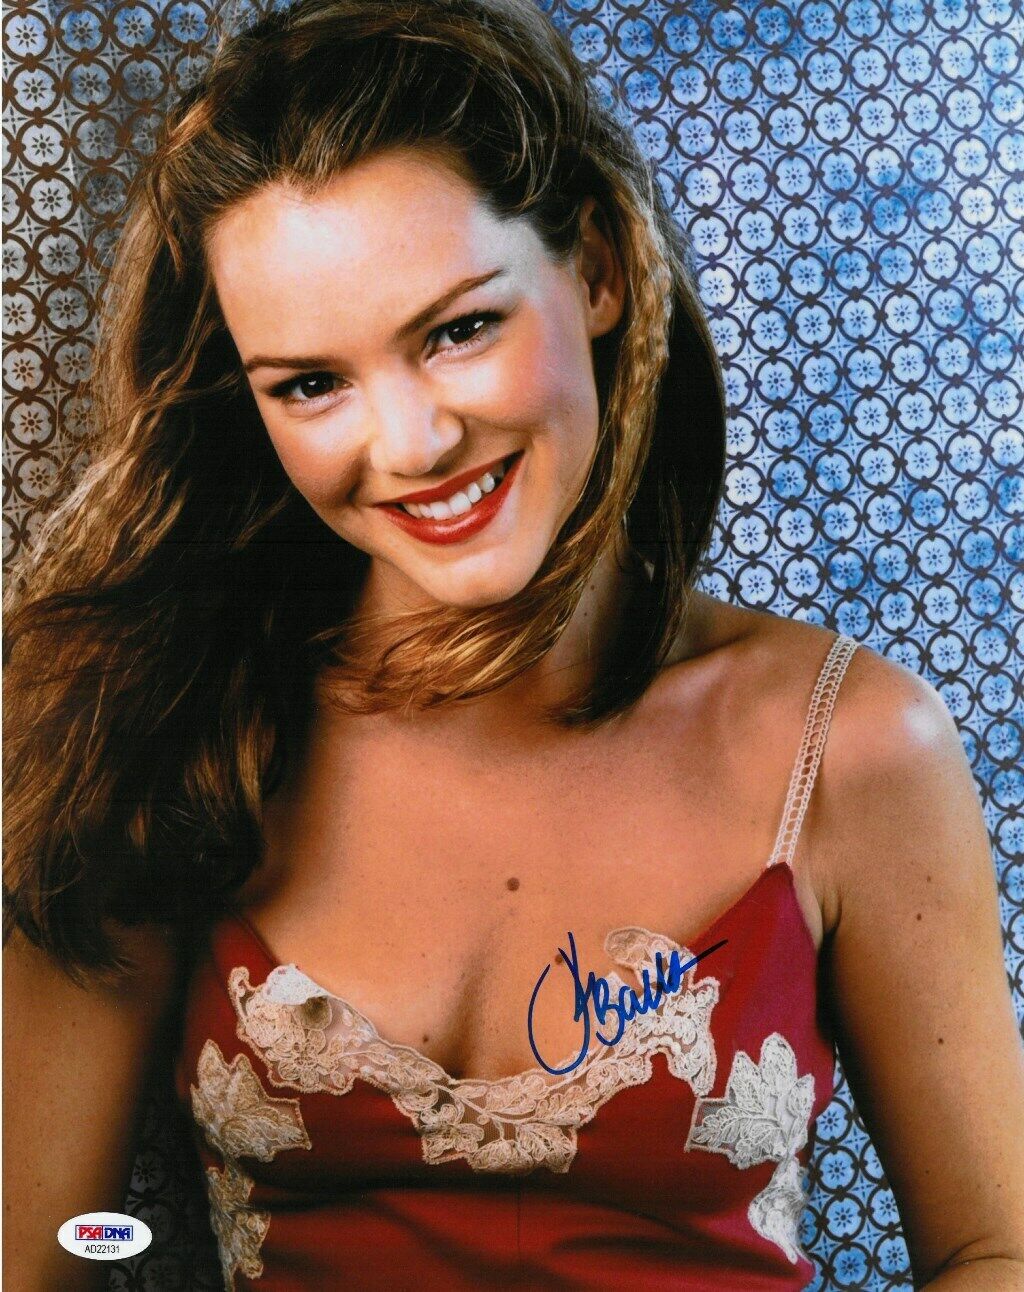 Jacinda Barrett Signed Authentic Autographed 11x14 Photo Poster painting PSA/DNA #AD22131